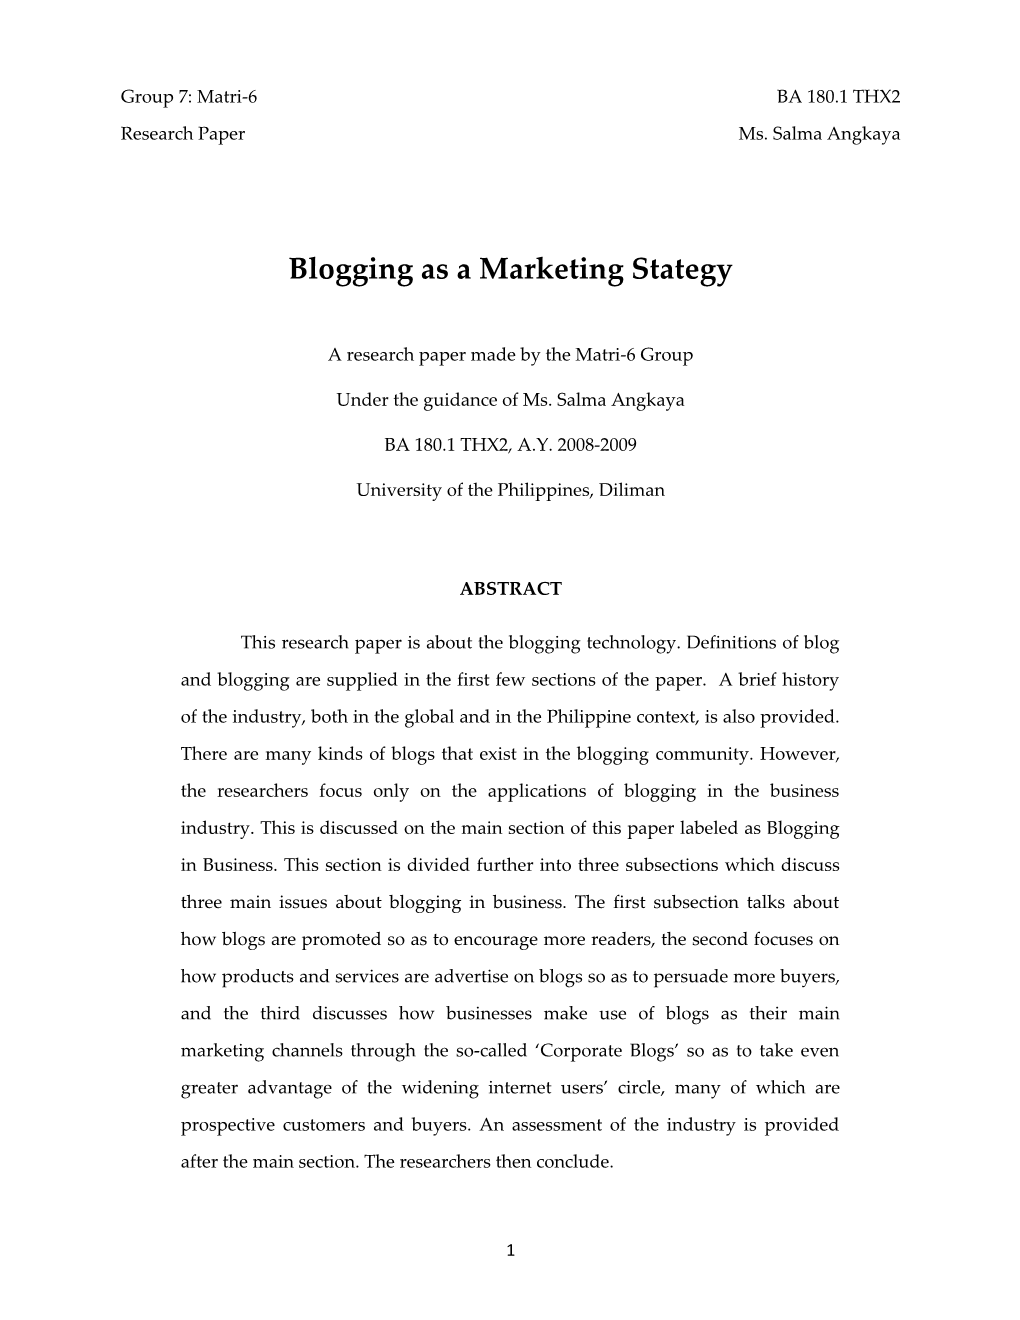 A Research Paper Made by the Matri-6 Group